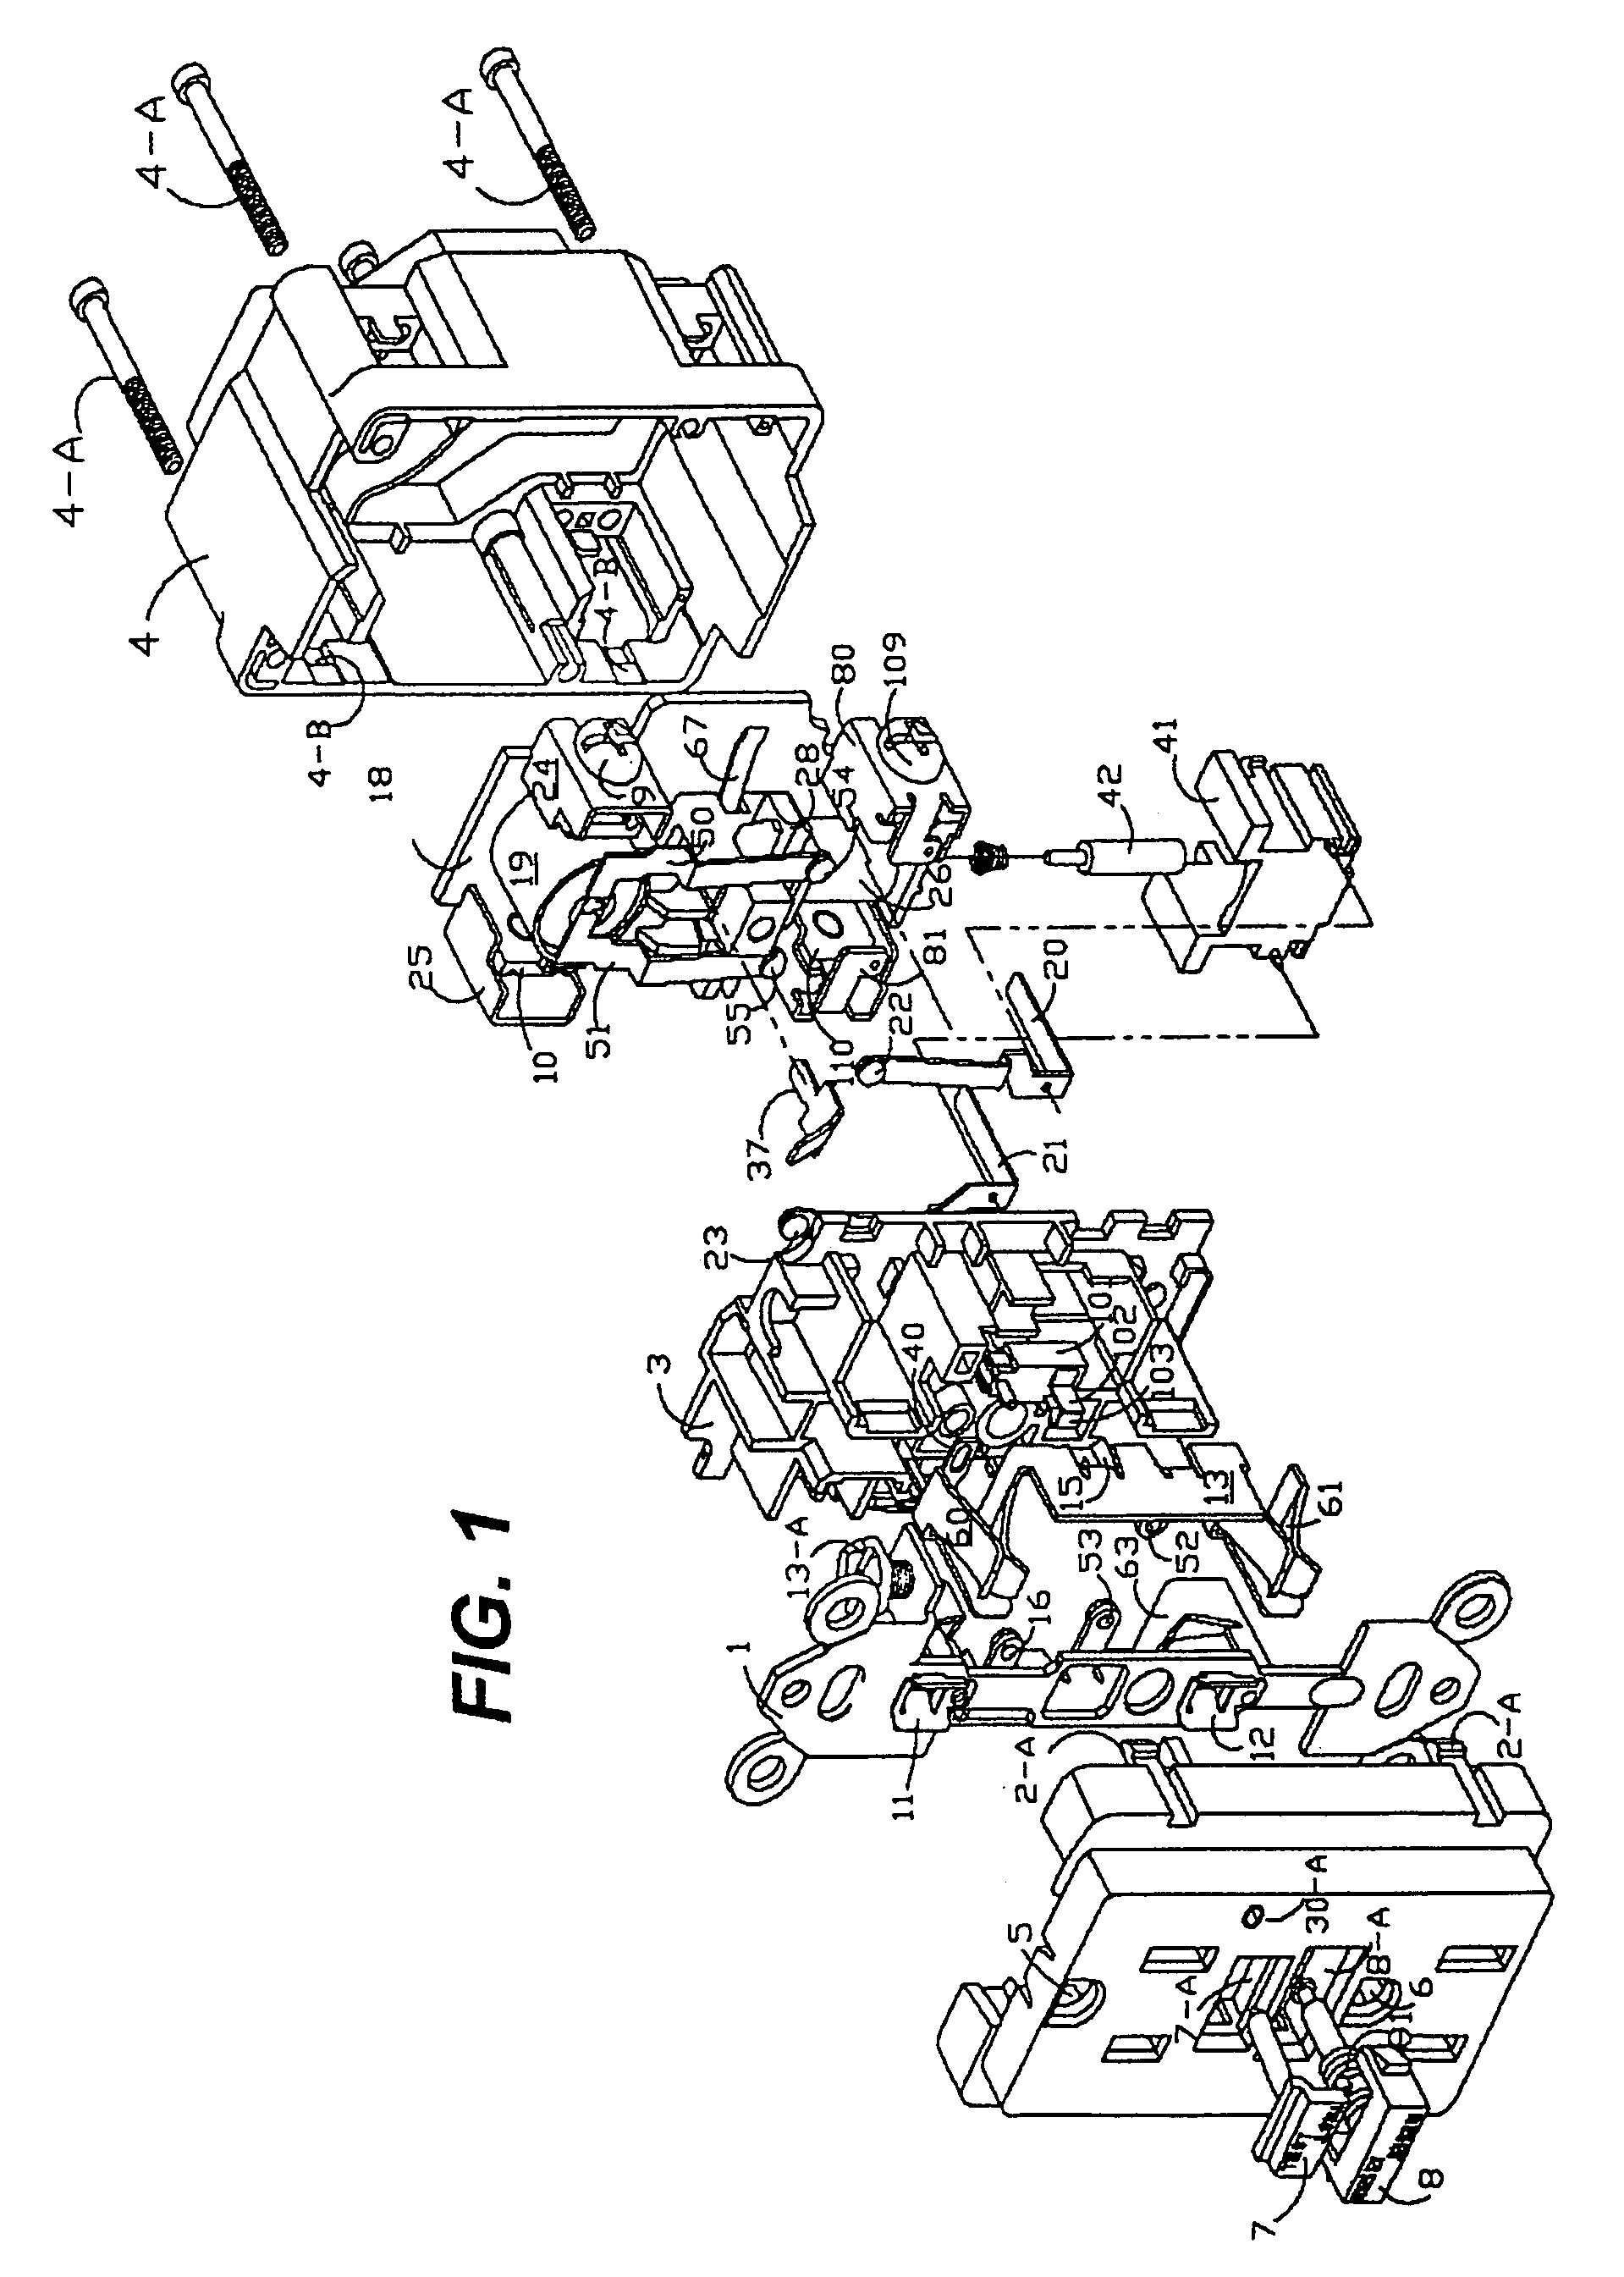 Ground fault circuit interrupter containing a dual-function test button